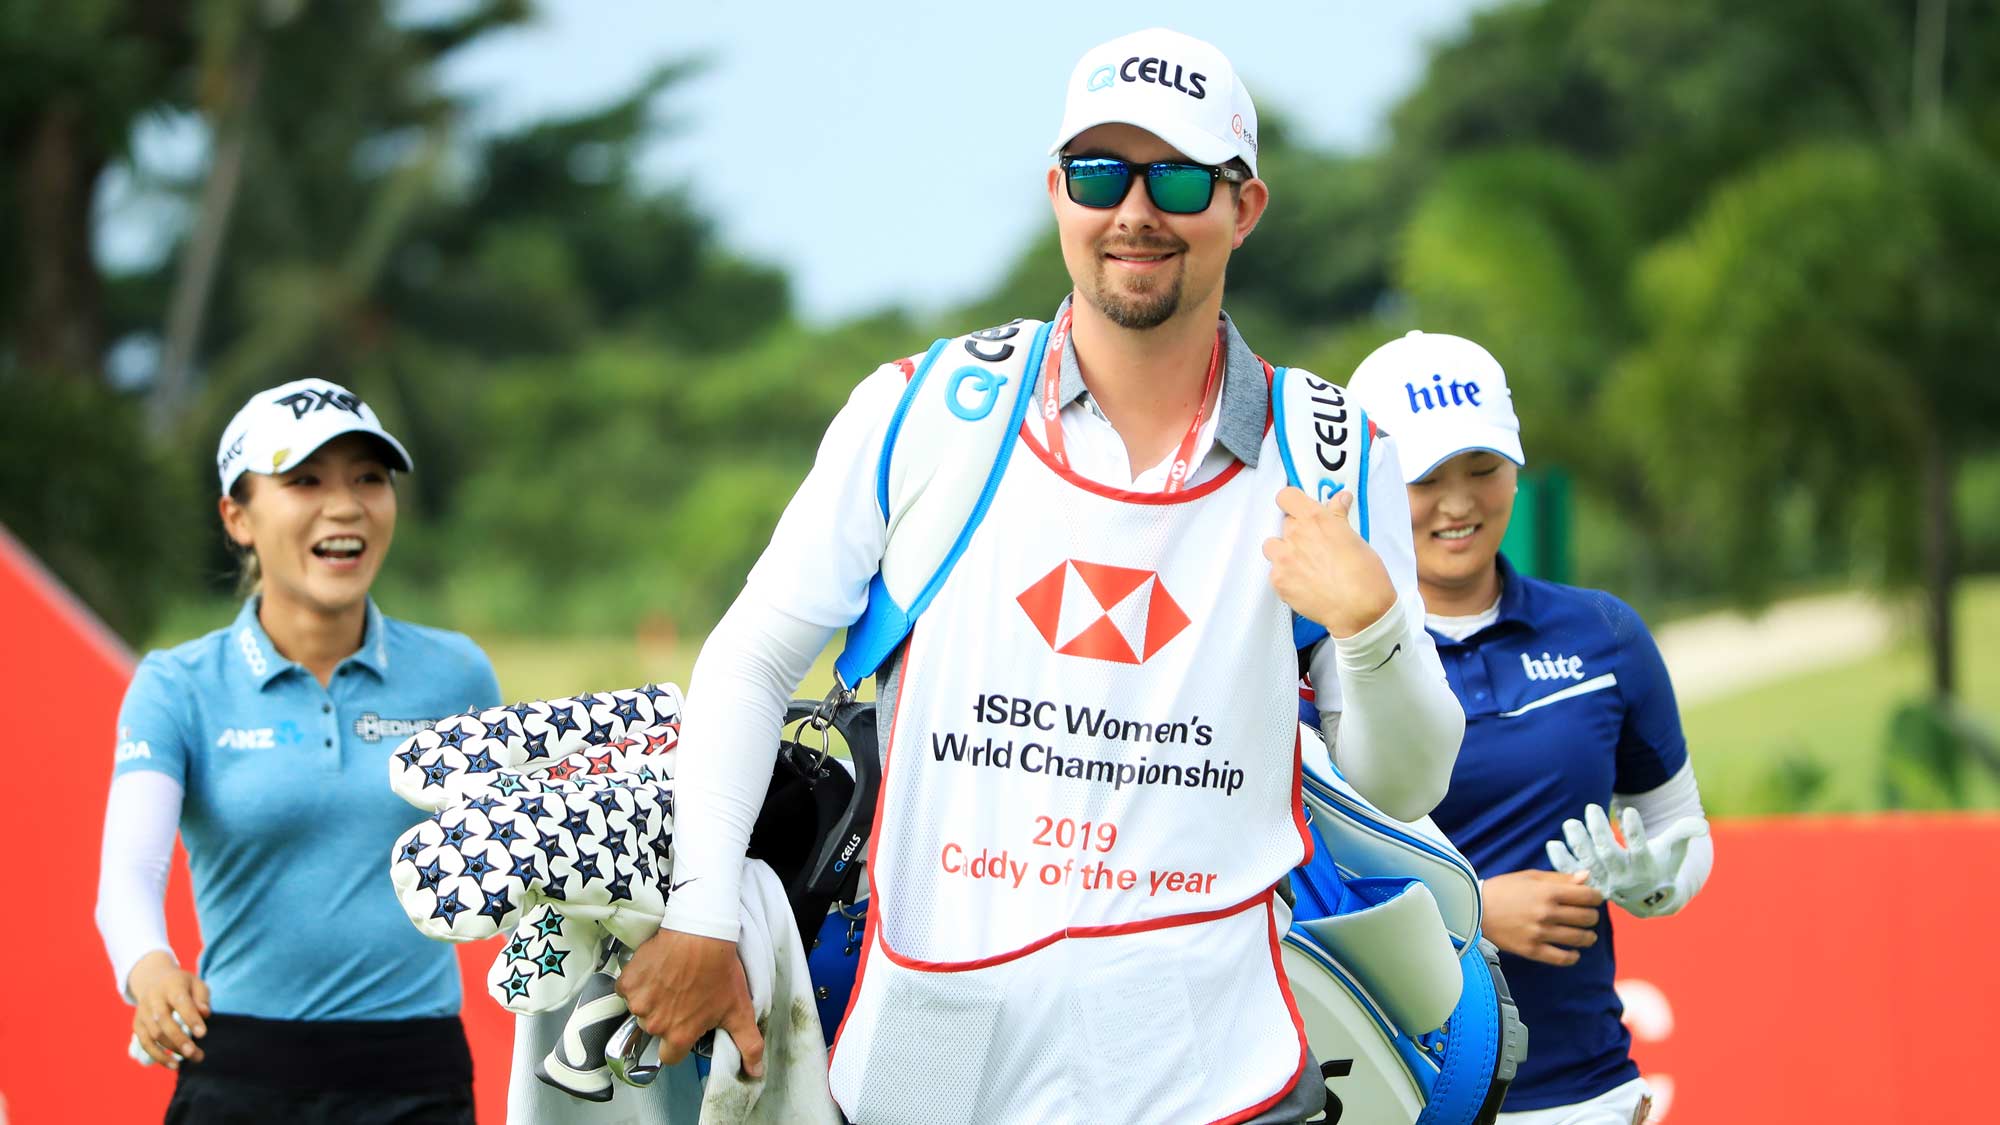 2019 Caddy of the Year Martin Bozek, caddie for Eun-Hee Ji of South Korea, walks from first tee during the third round of the HSBC Women's World Championship at Sentosa Golf Club on March 02, 2019 in Singapore.